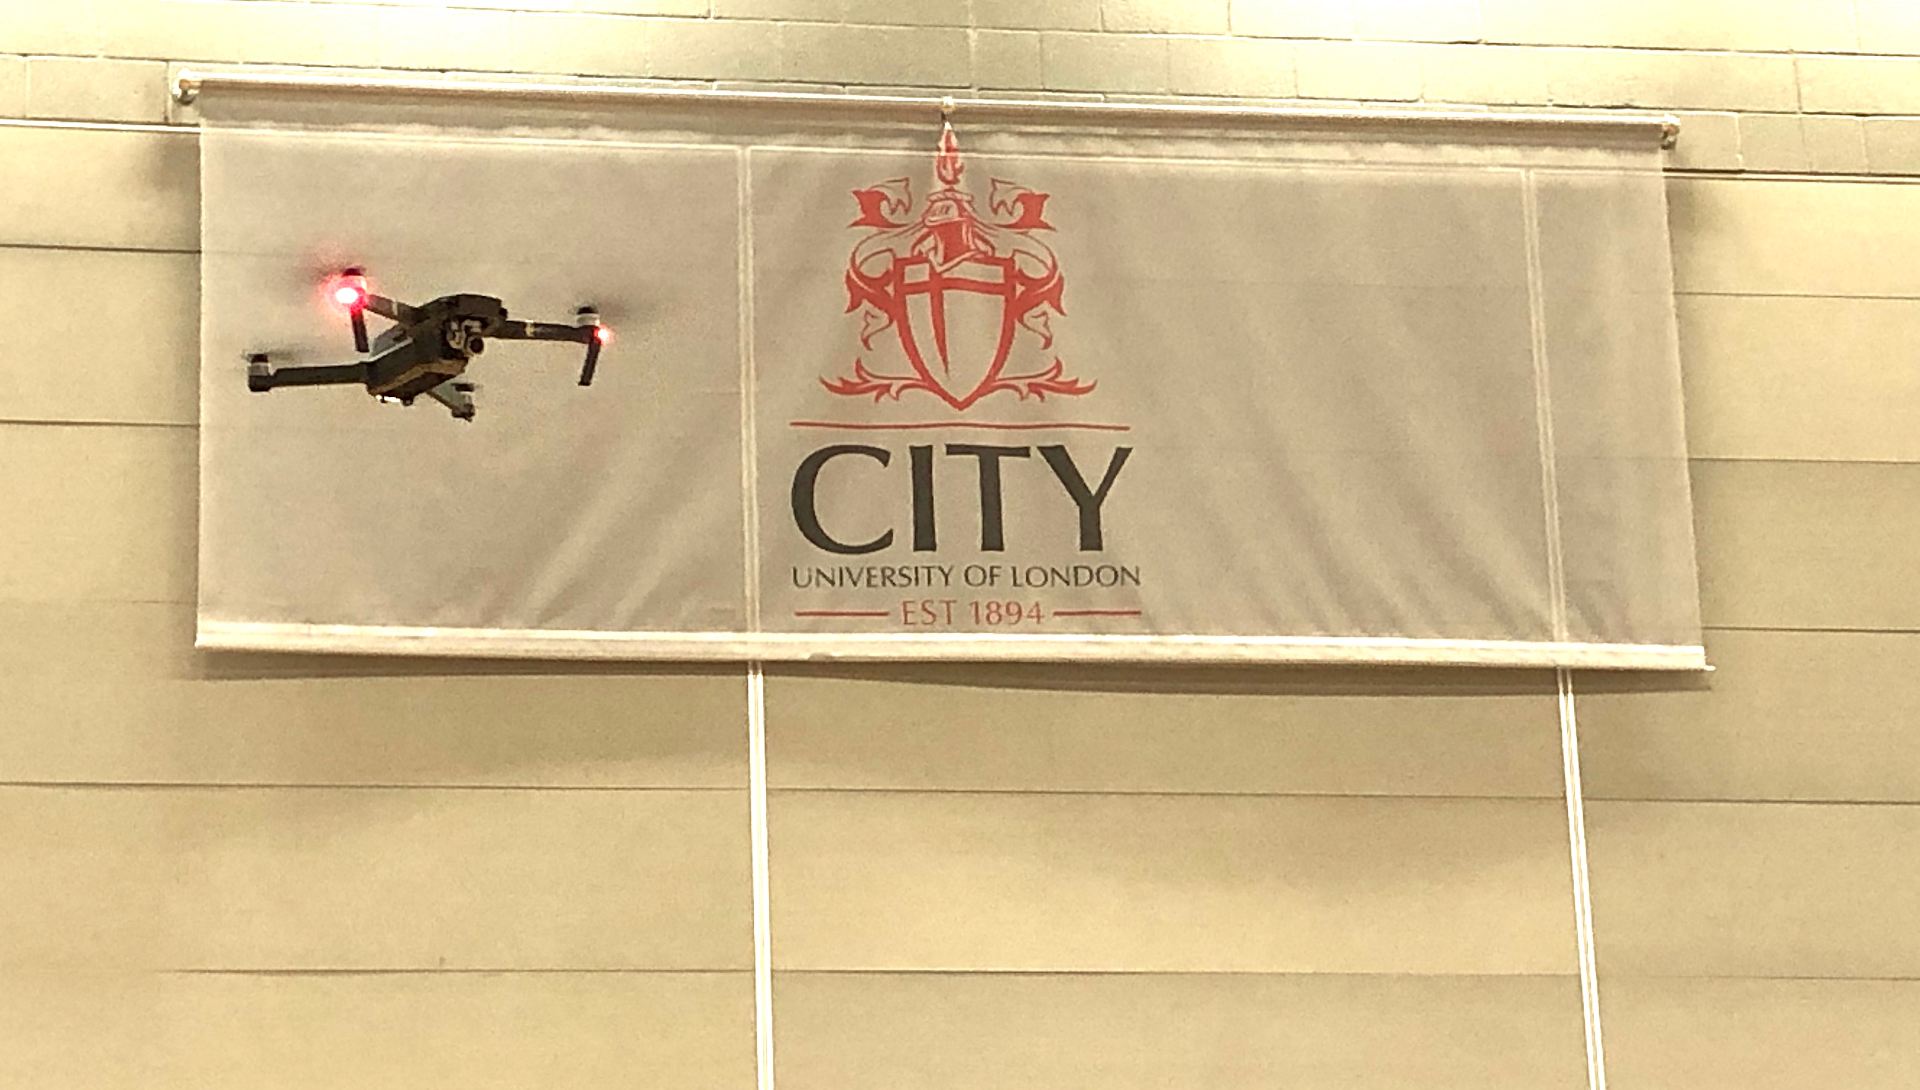 Drone flying in front of City, University of London banner on wall of CitySport gym